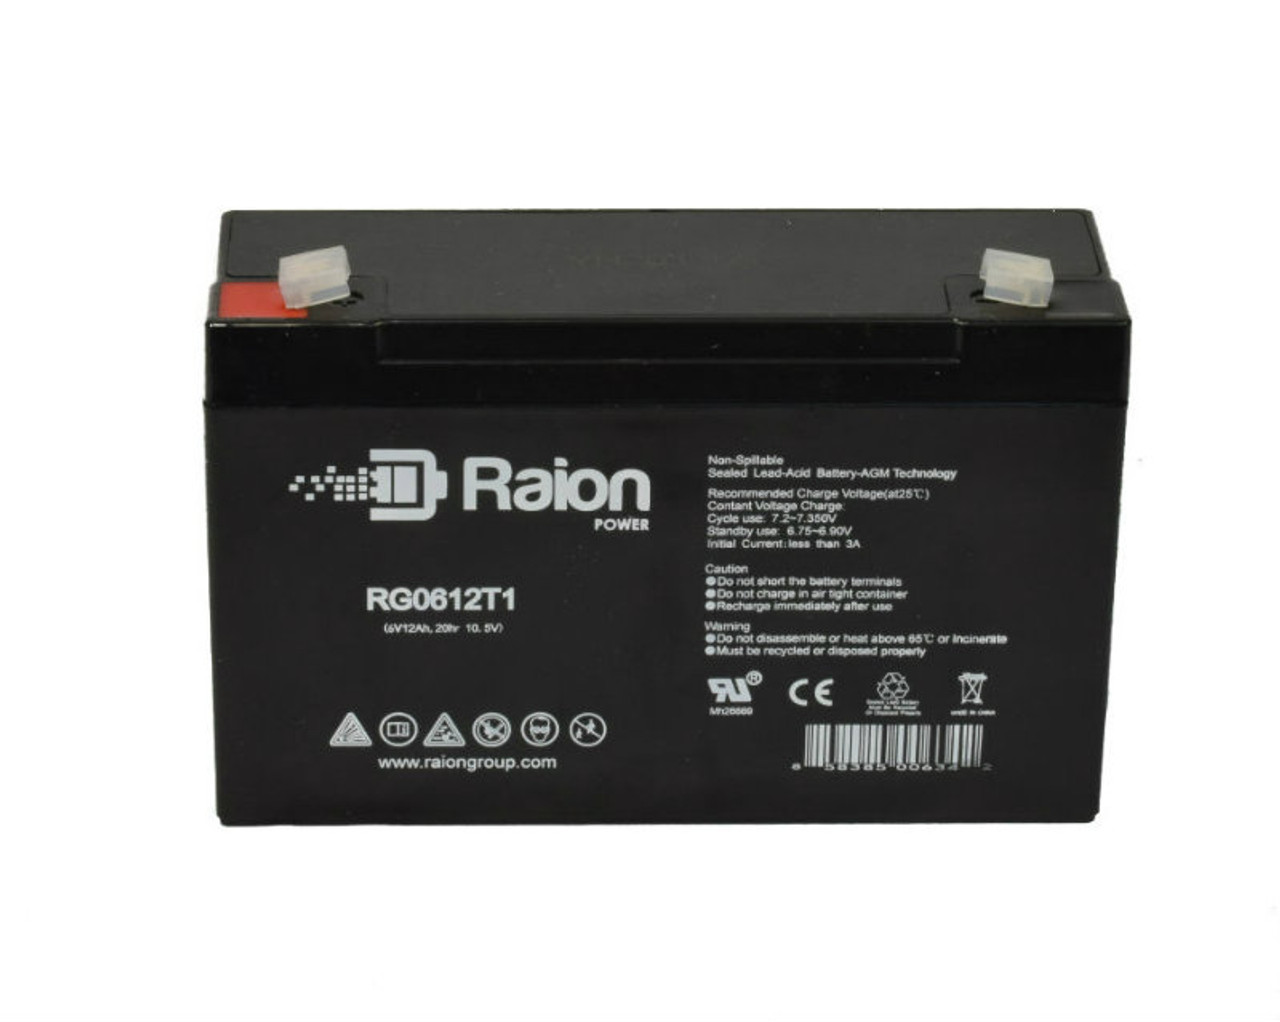 Raion Power RG06120T1 Replacement Battery Cartridge for Safe 500A